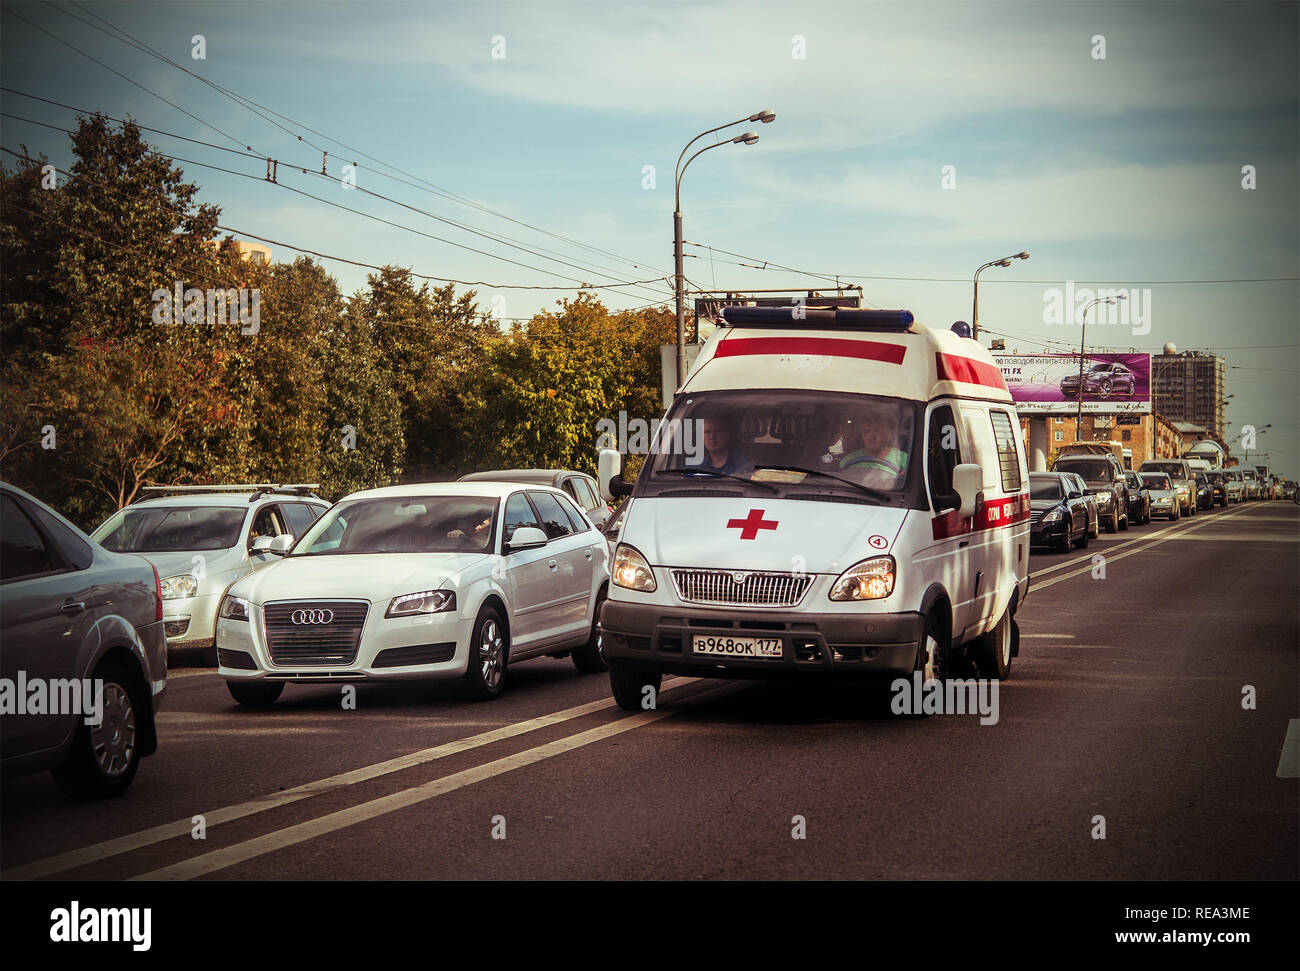 Moscow, Russia, 2012: ambulance van rushes on the opposite road lane Stock Photo